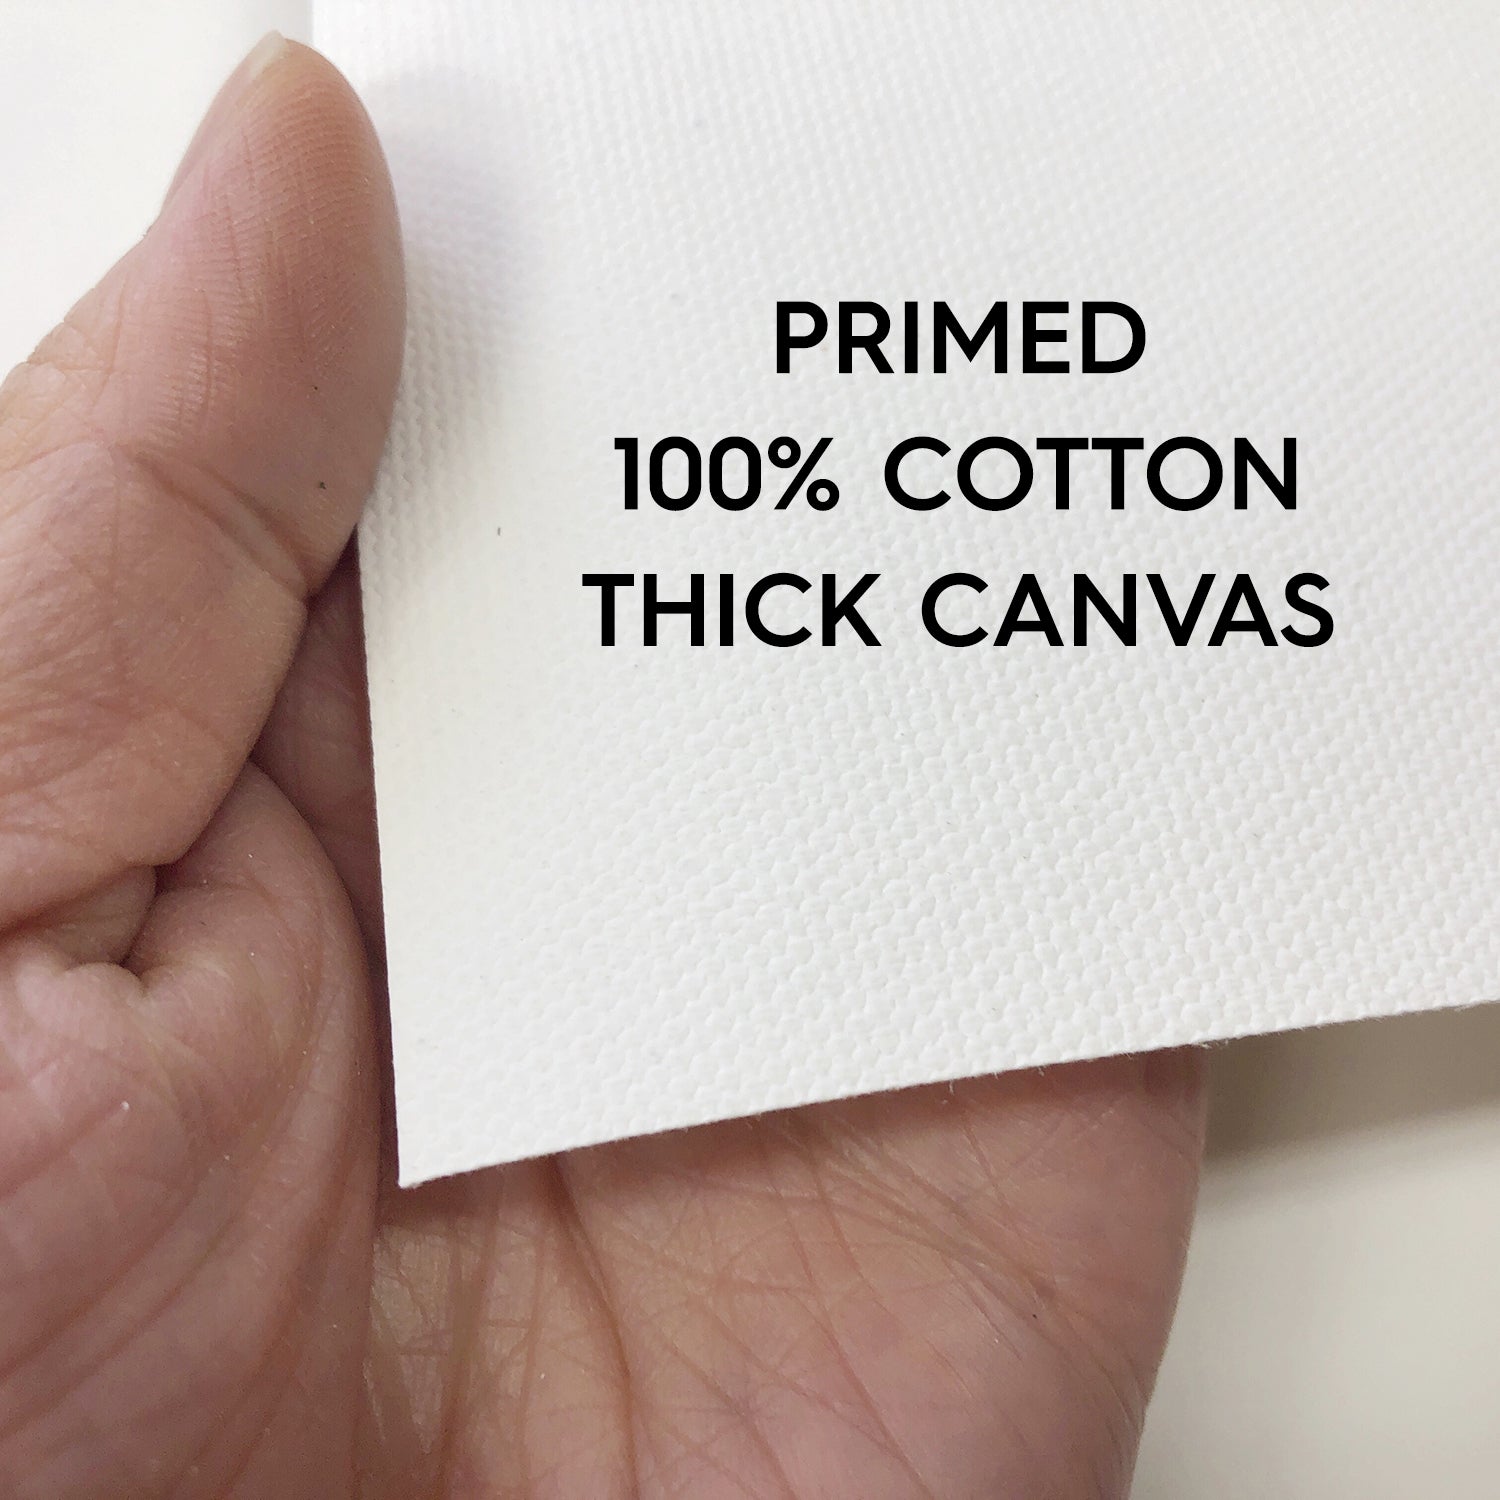 11x14" Canvas Blanks for Painting - Flat Unstretched 100% Cotton Sheets - Hanger Frames